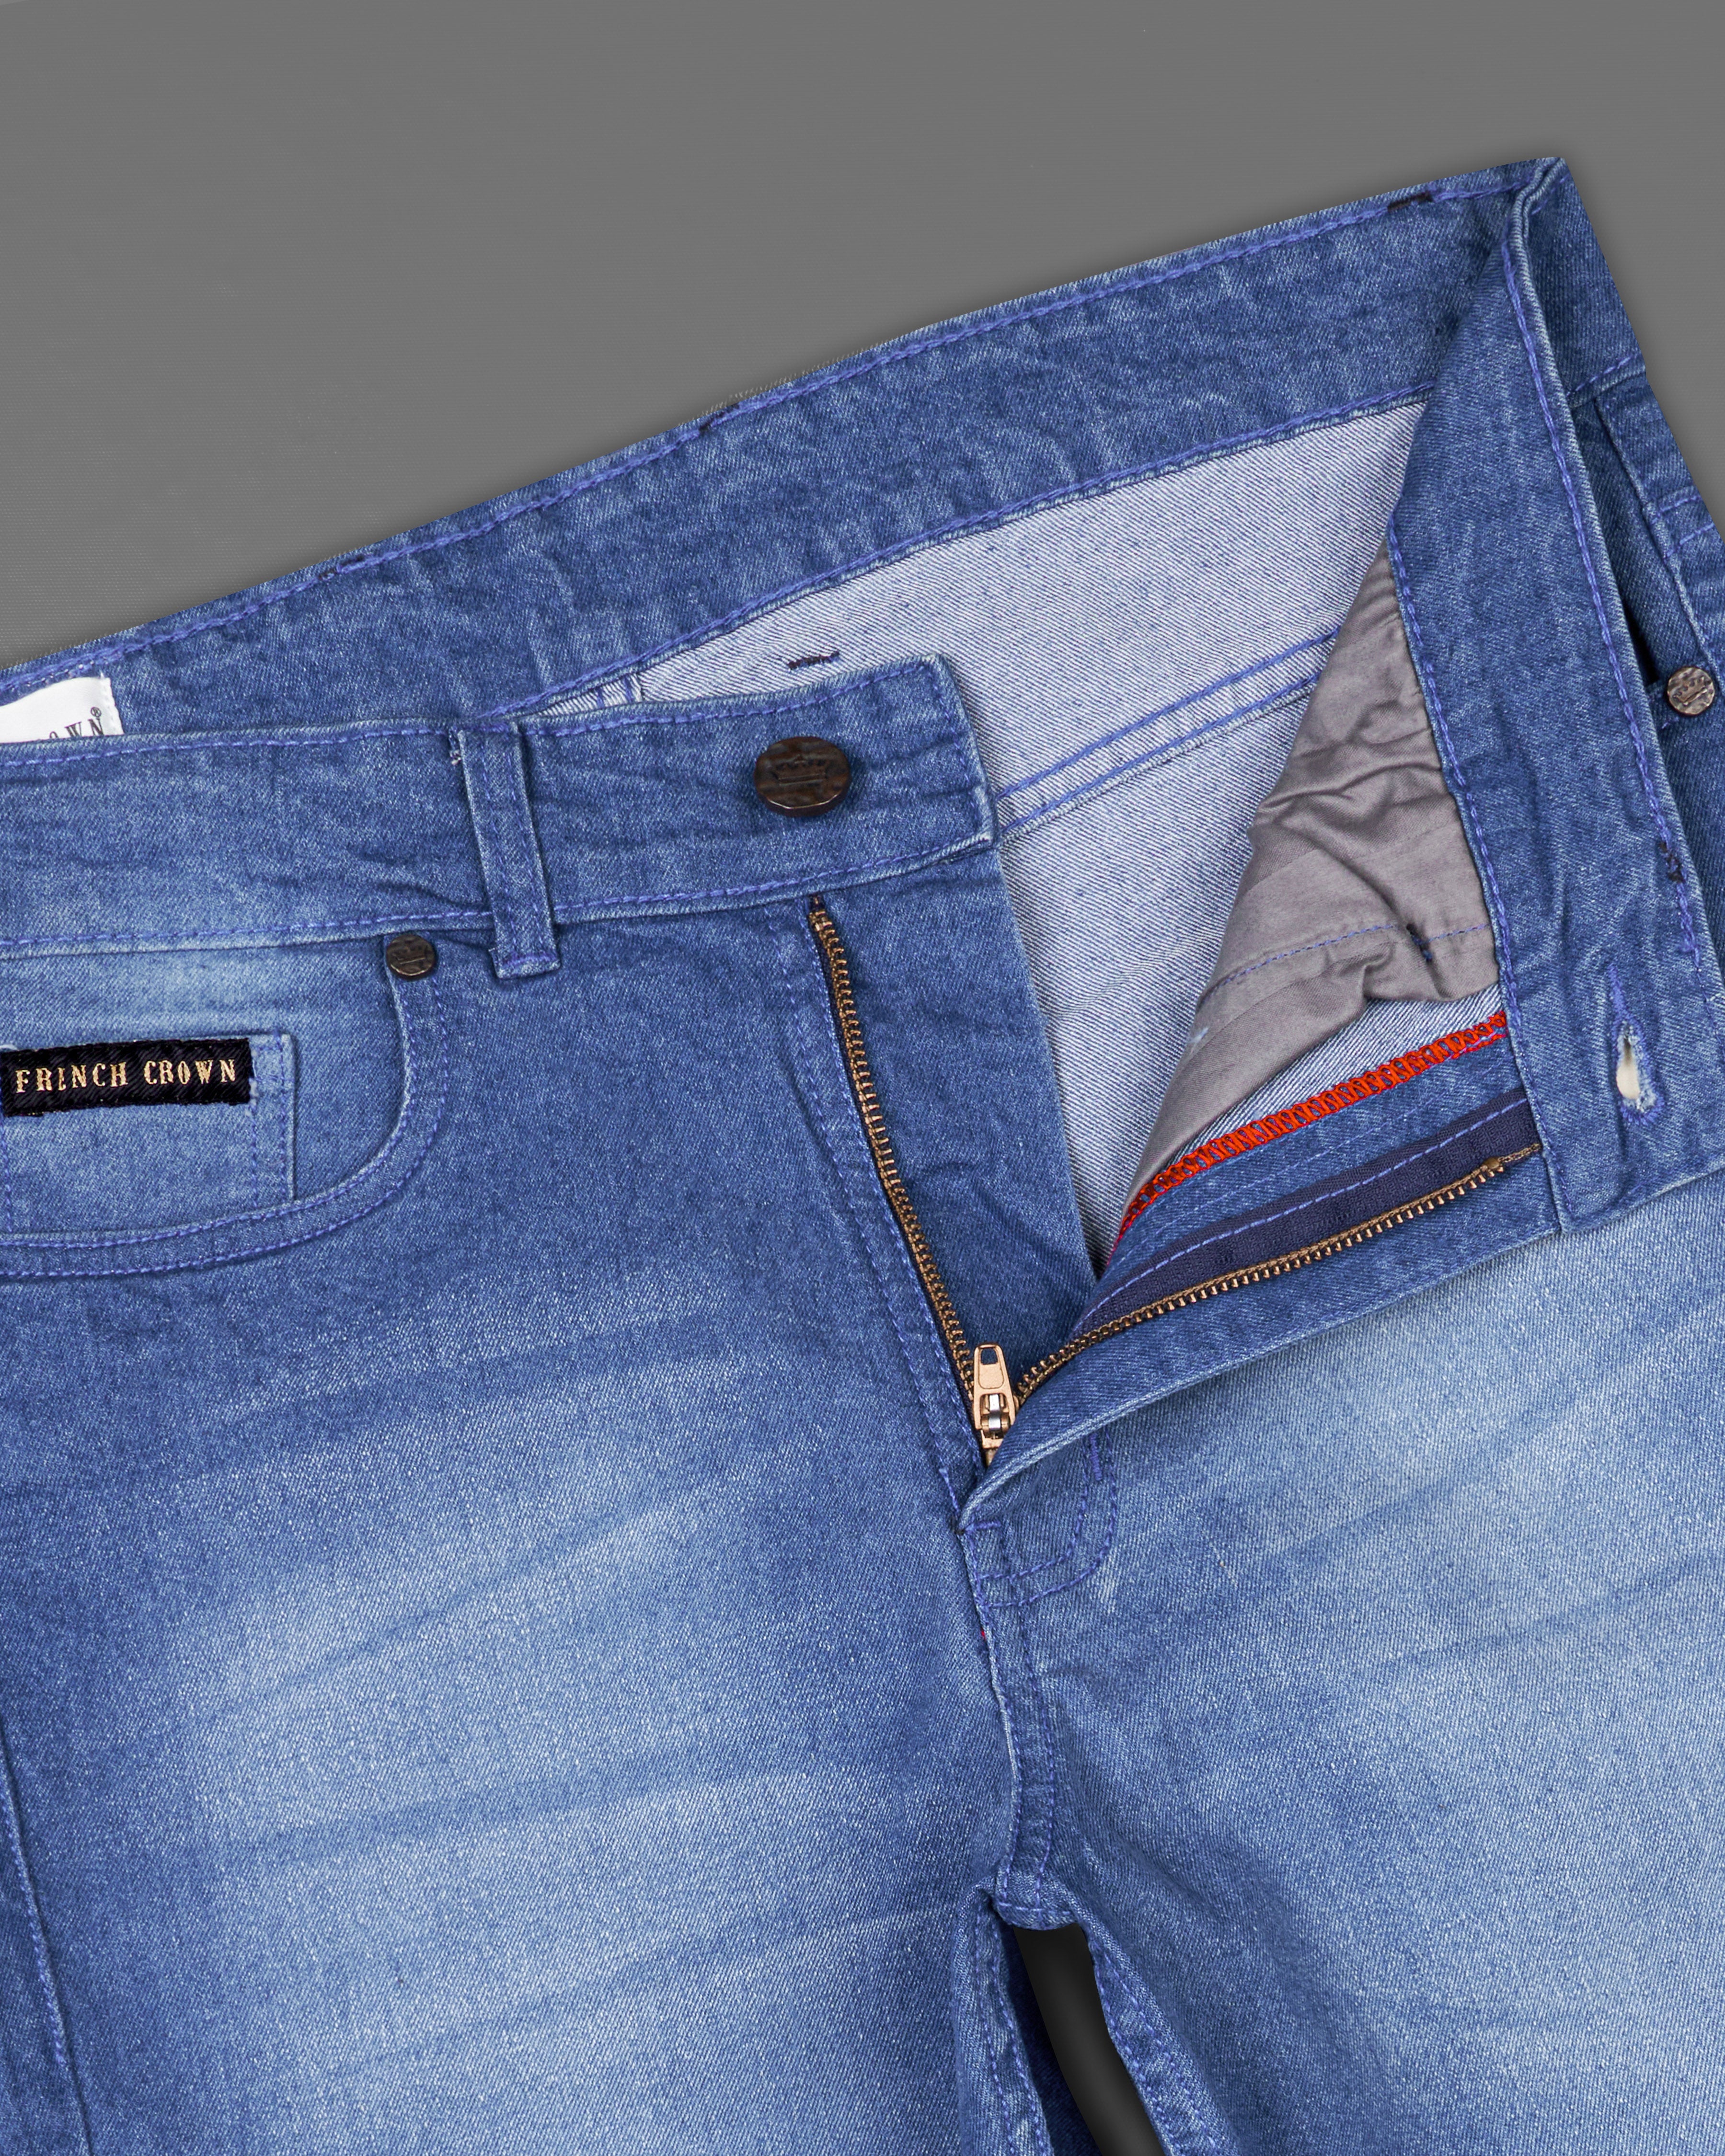 Glaucous Blue Airplane Hand-Painted Stone Washed Denim J092-ART-32, J092-ART-34, J092-ART-36, J092-ART-38, J092-ART-40